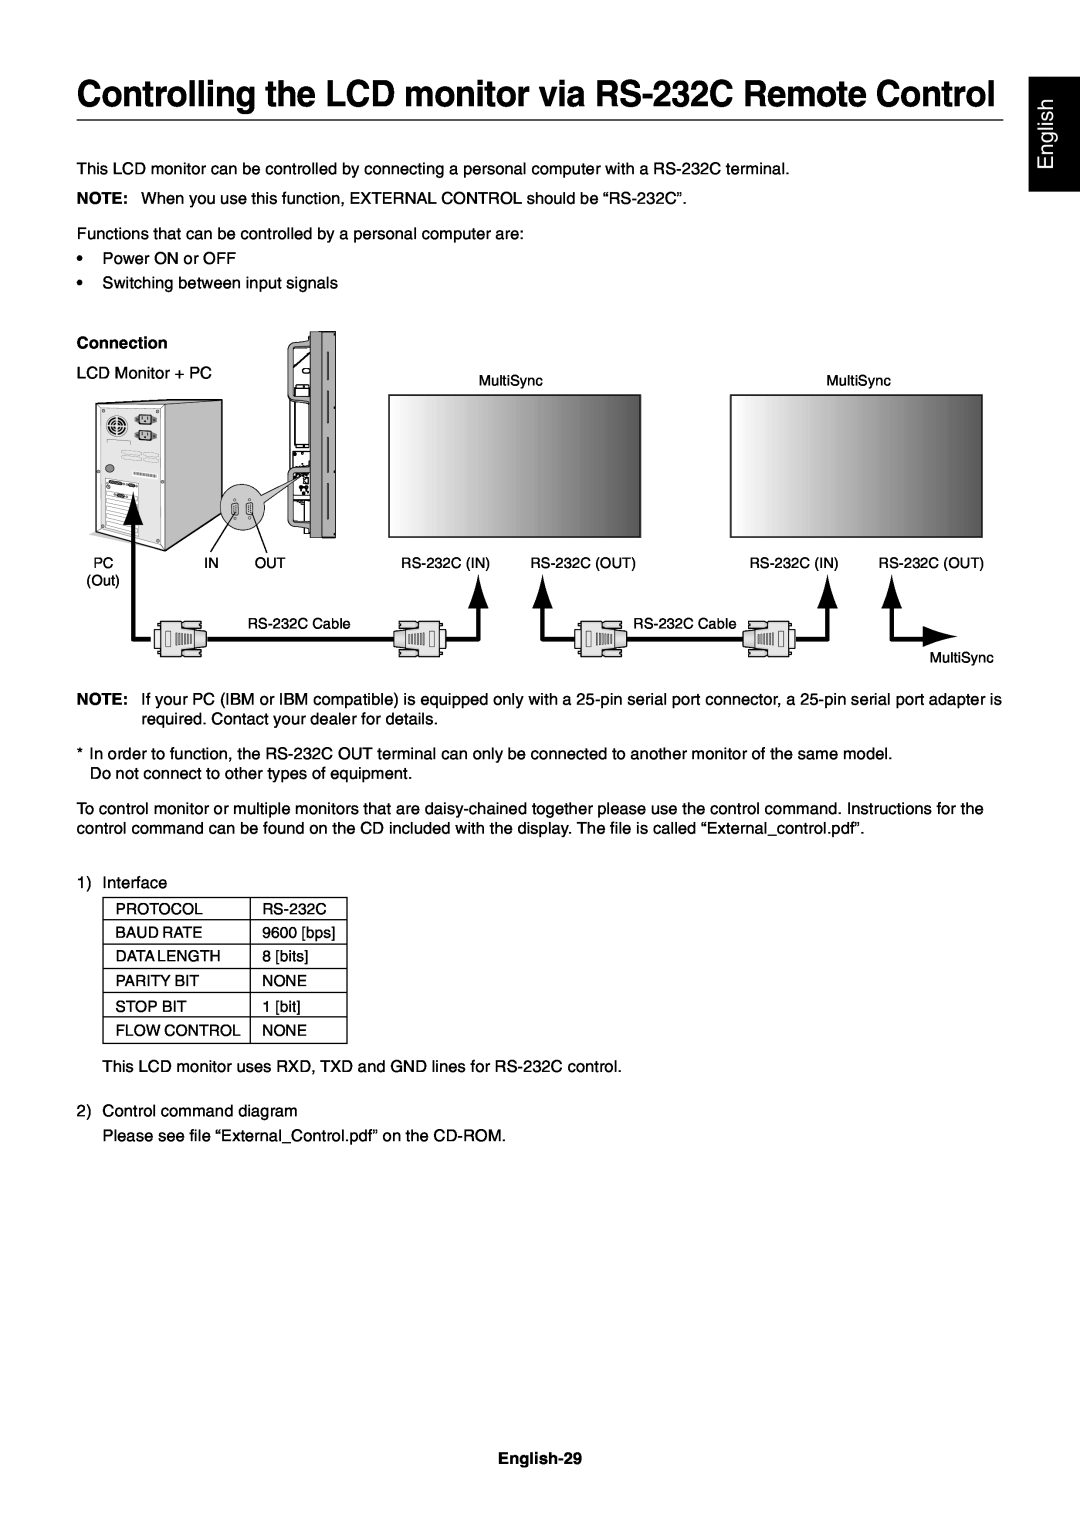 NEC X461UN user manual Controlling the LCD monitor via RS-232C Remote Control, Connection, English-29 